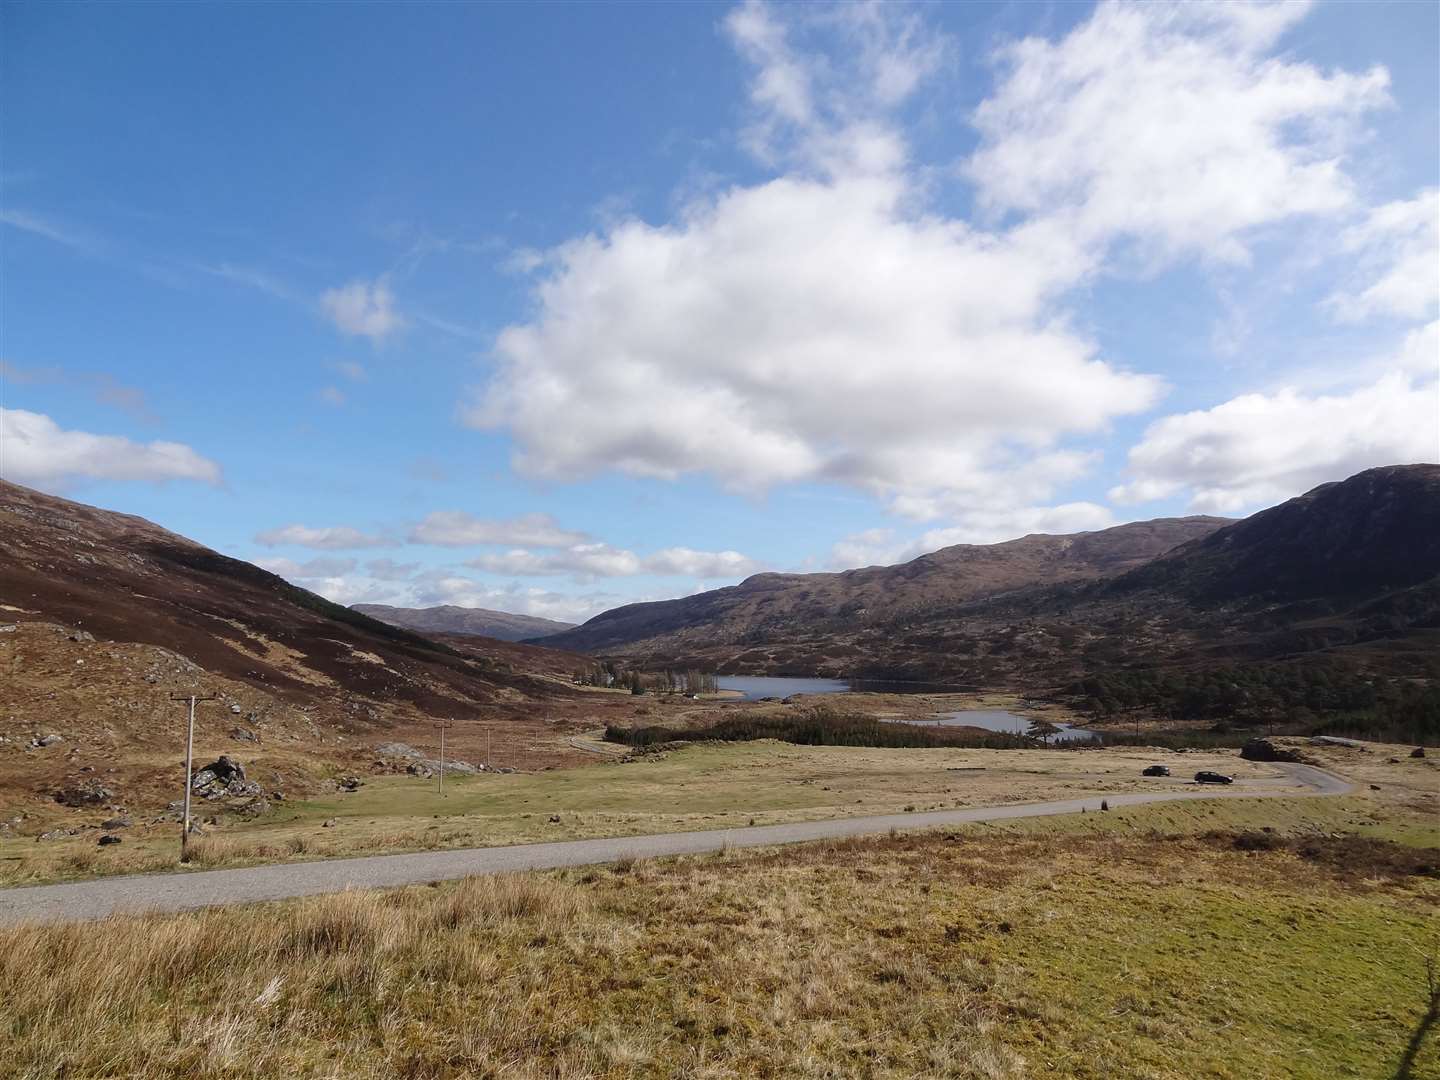 The walker was found 'safe and well' in the Mullardoch area, pictured.